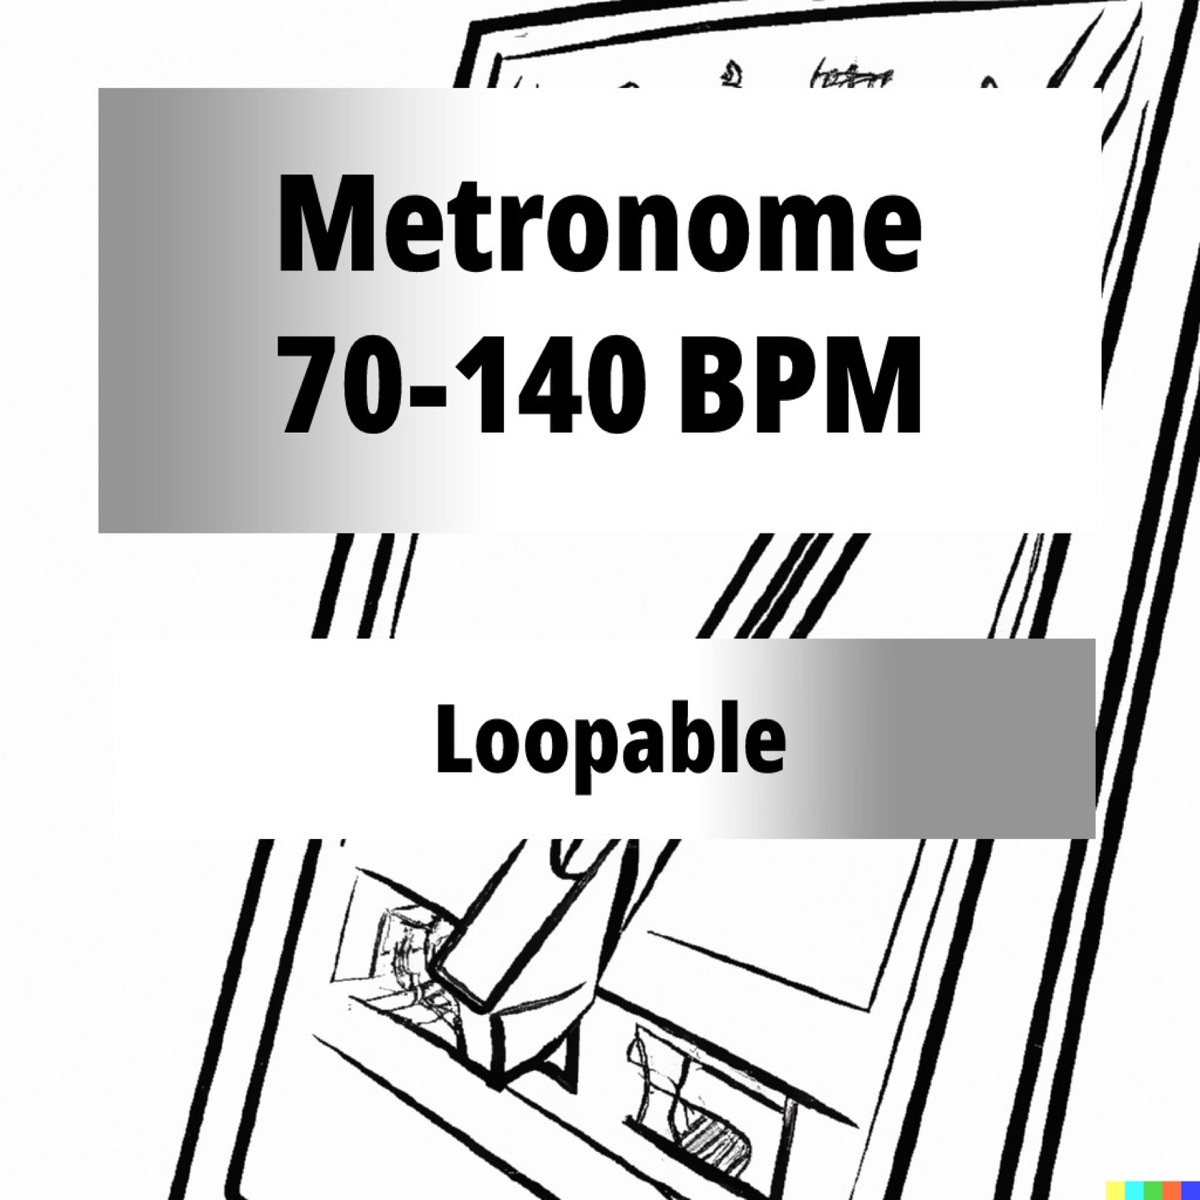 Metronome 70-140 BPM - Album by Perfect Drum Loops - Apple Music